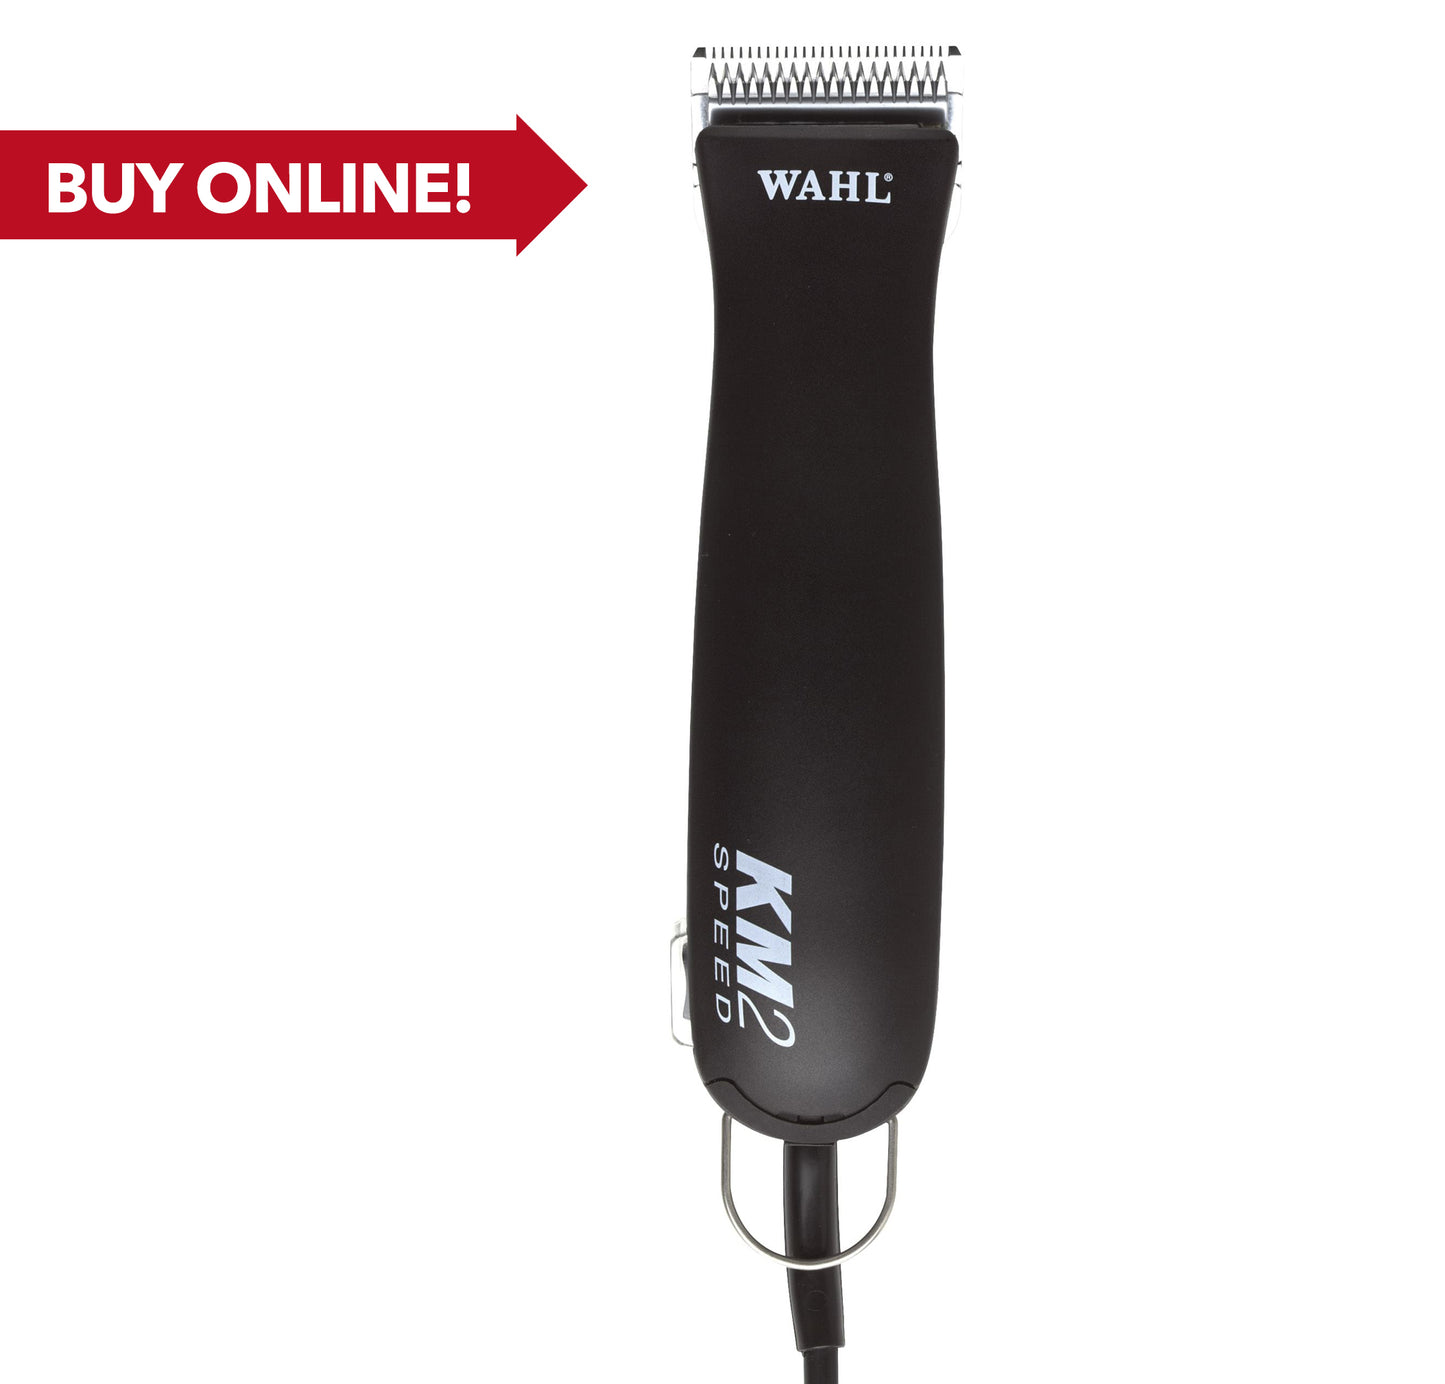 WAHL - KM2 Speed Corded Clipper